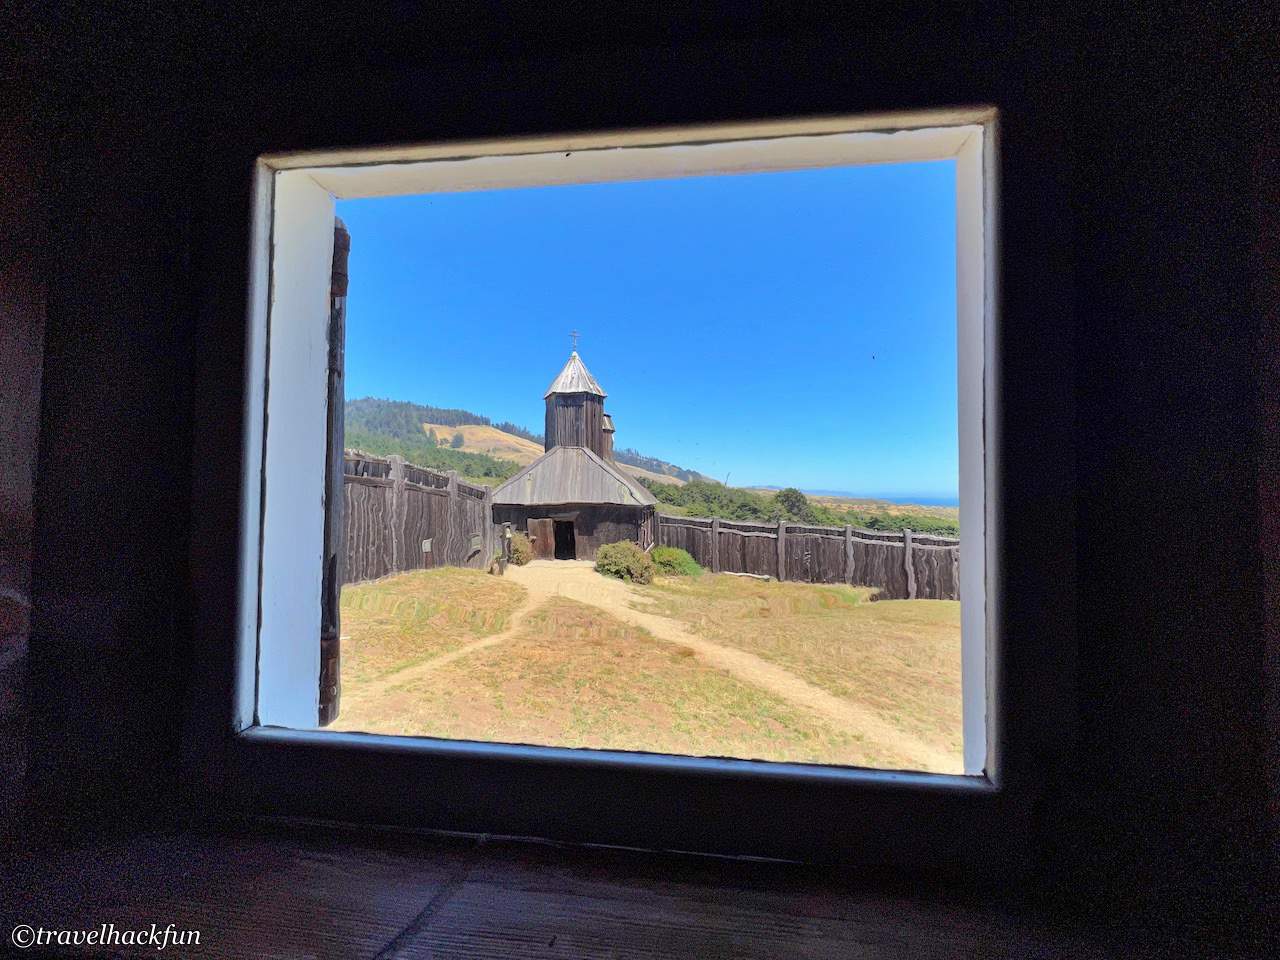 Fort Ross,俄羅斯堡,fort ross state park,fort ross state historic park,fort ross california 32